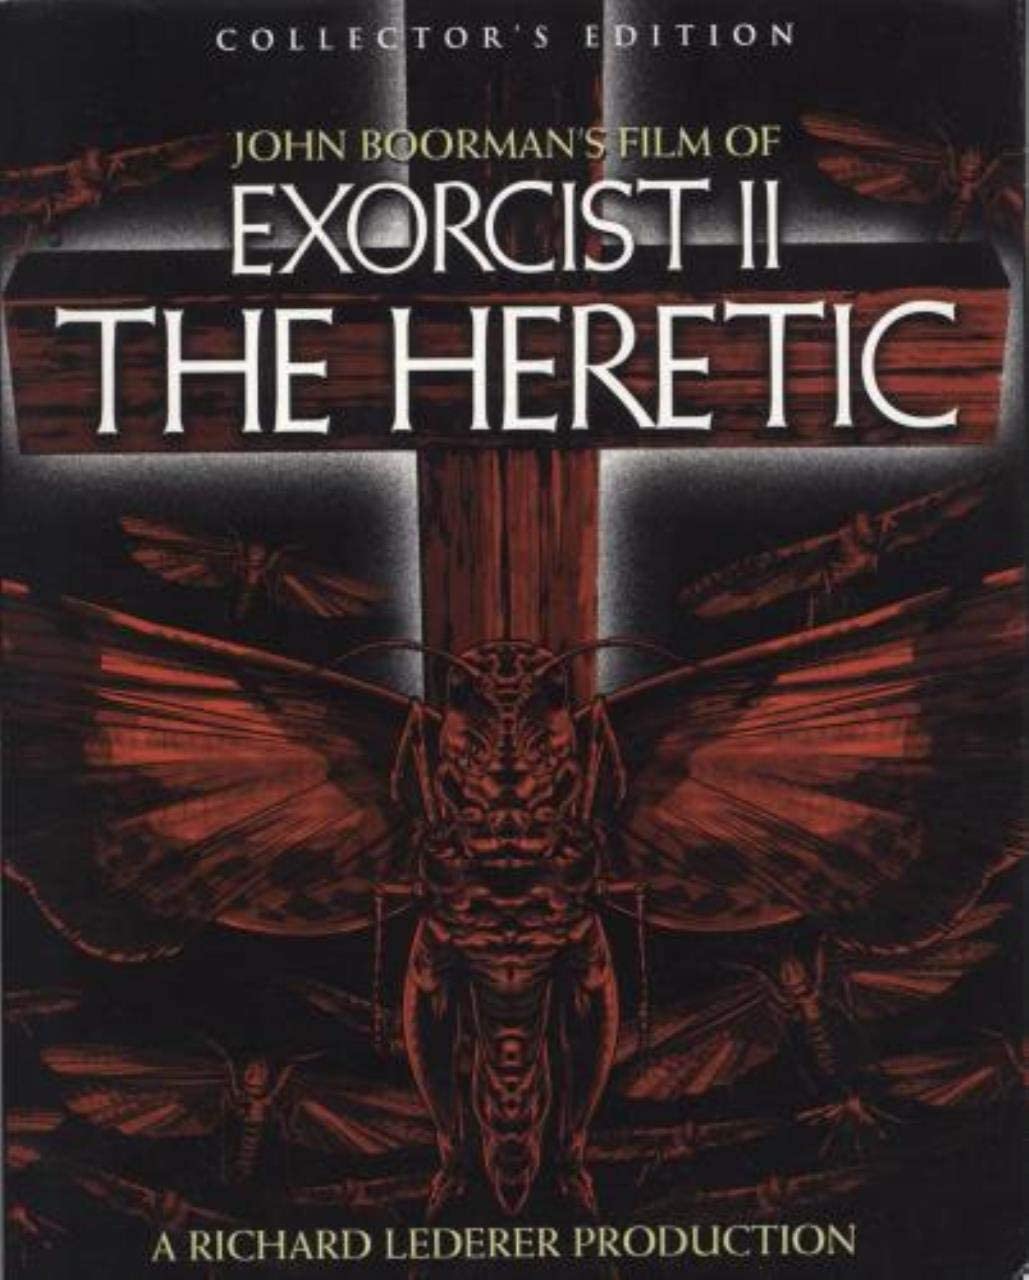 Exorcist II: The Heretic (Collector's Edition) [BluRay]